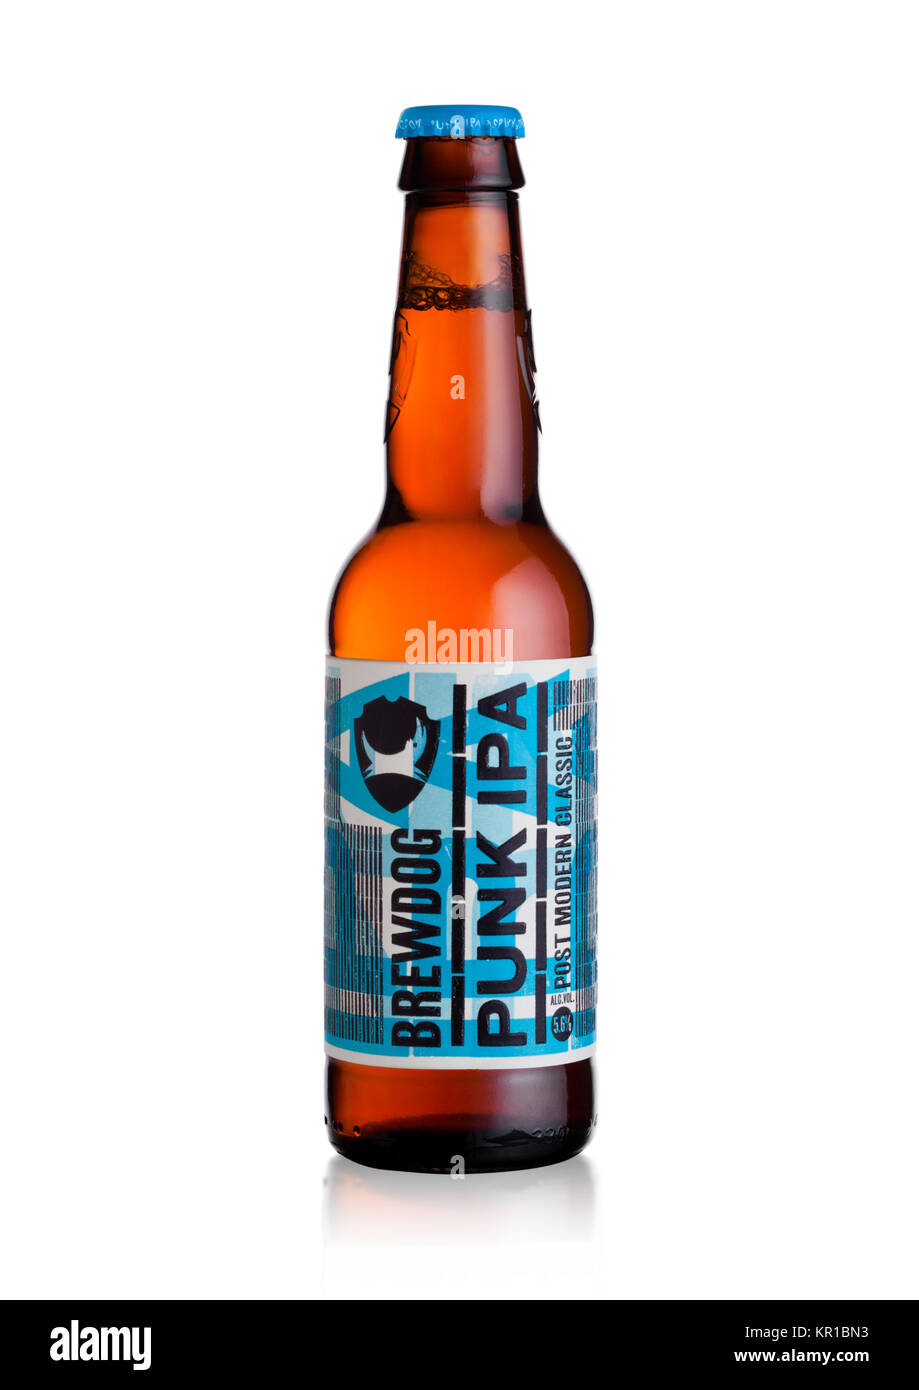 LONDON, UK - DECEMBER 15, 2017: Bottle of Punk Ipa post modern classic, from the Brewdog brewery on white background. Stock Photo